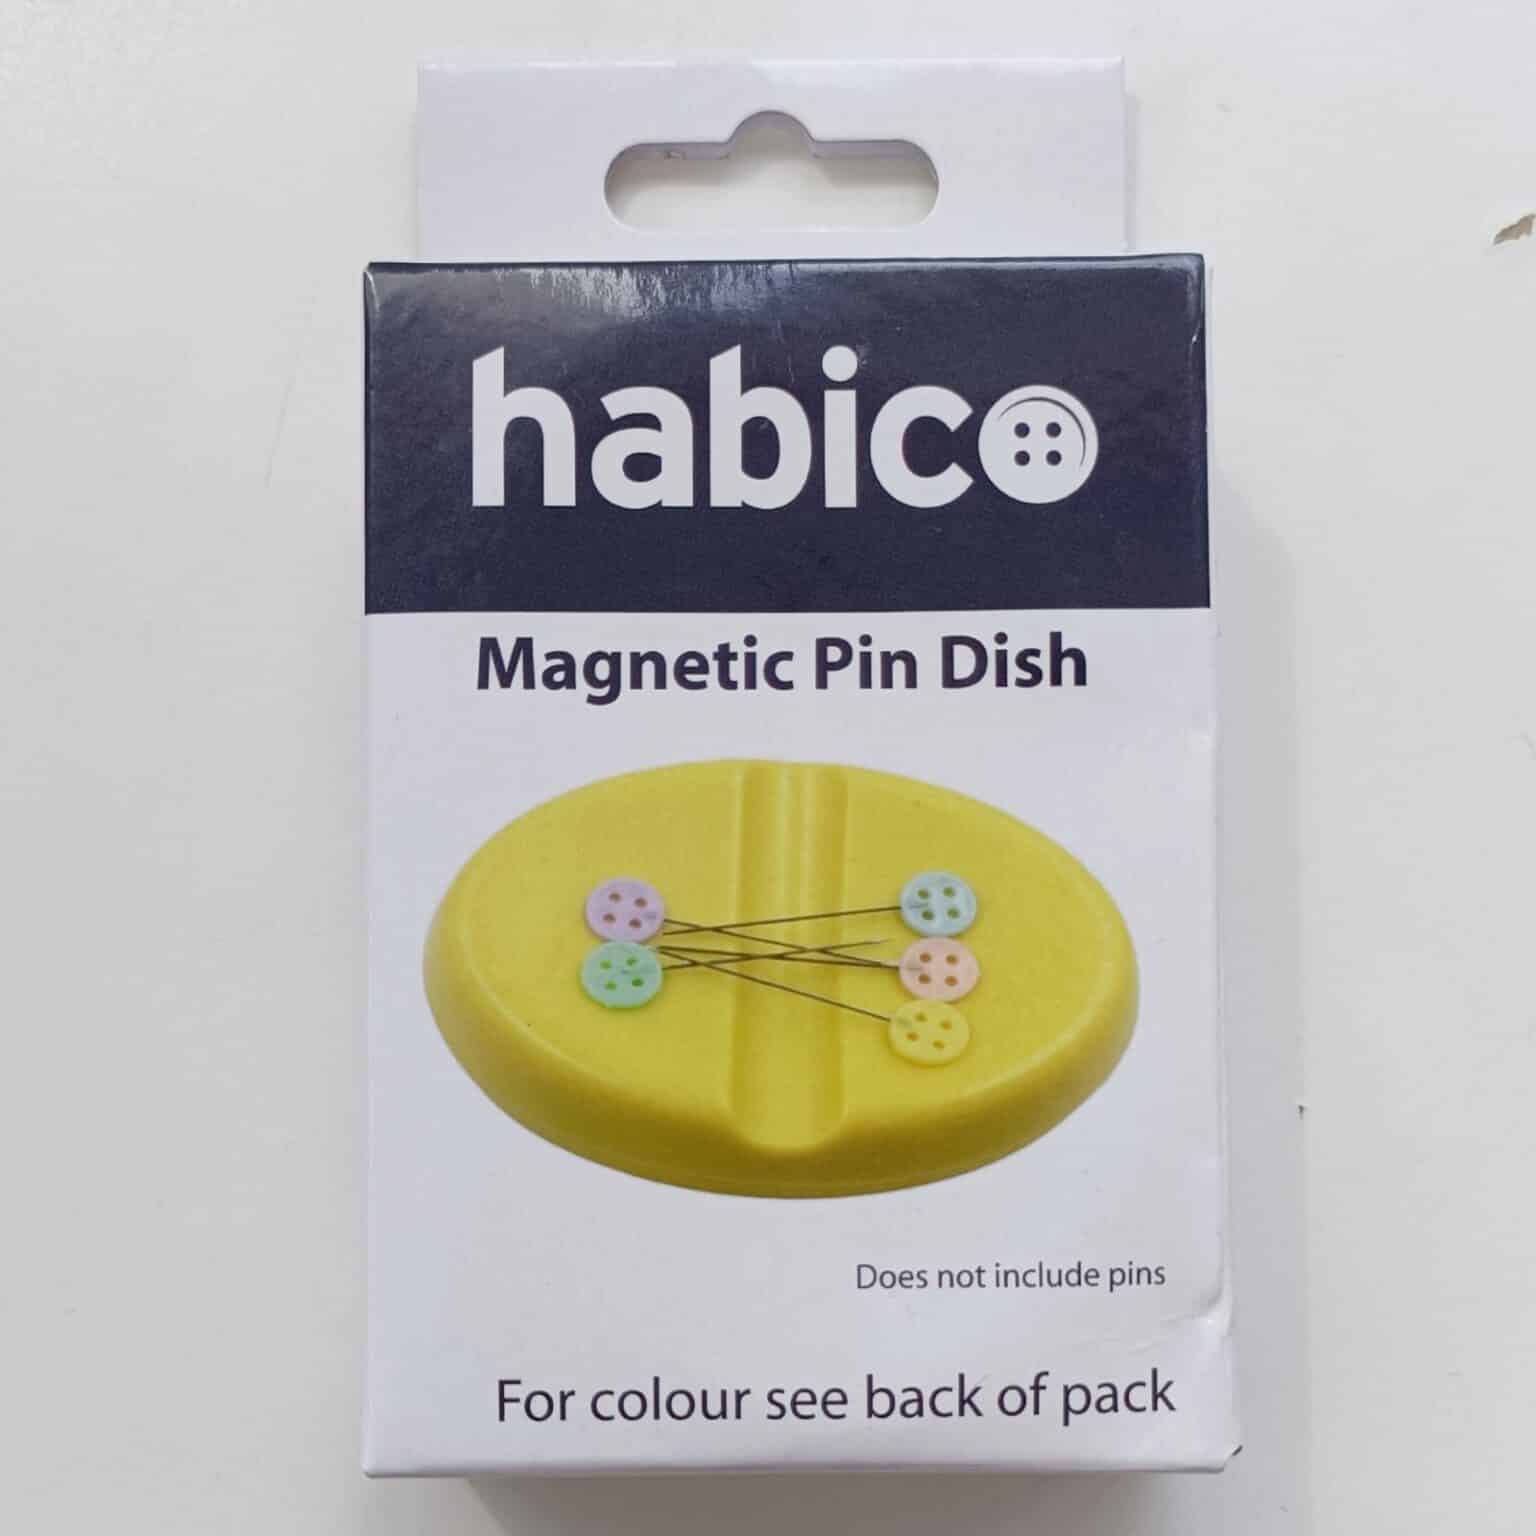 Habico Magnetic Sewing Pin Dish | More Sewing